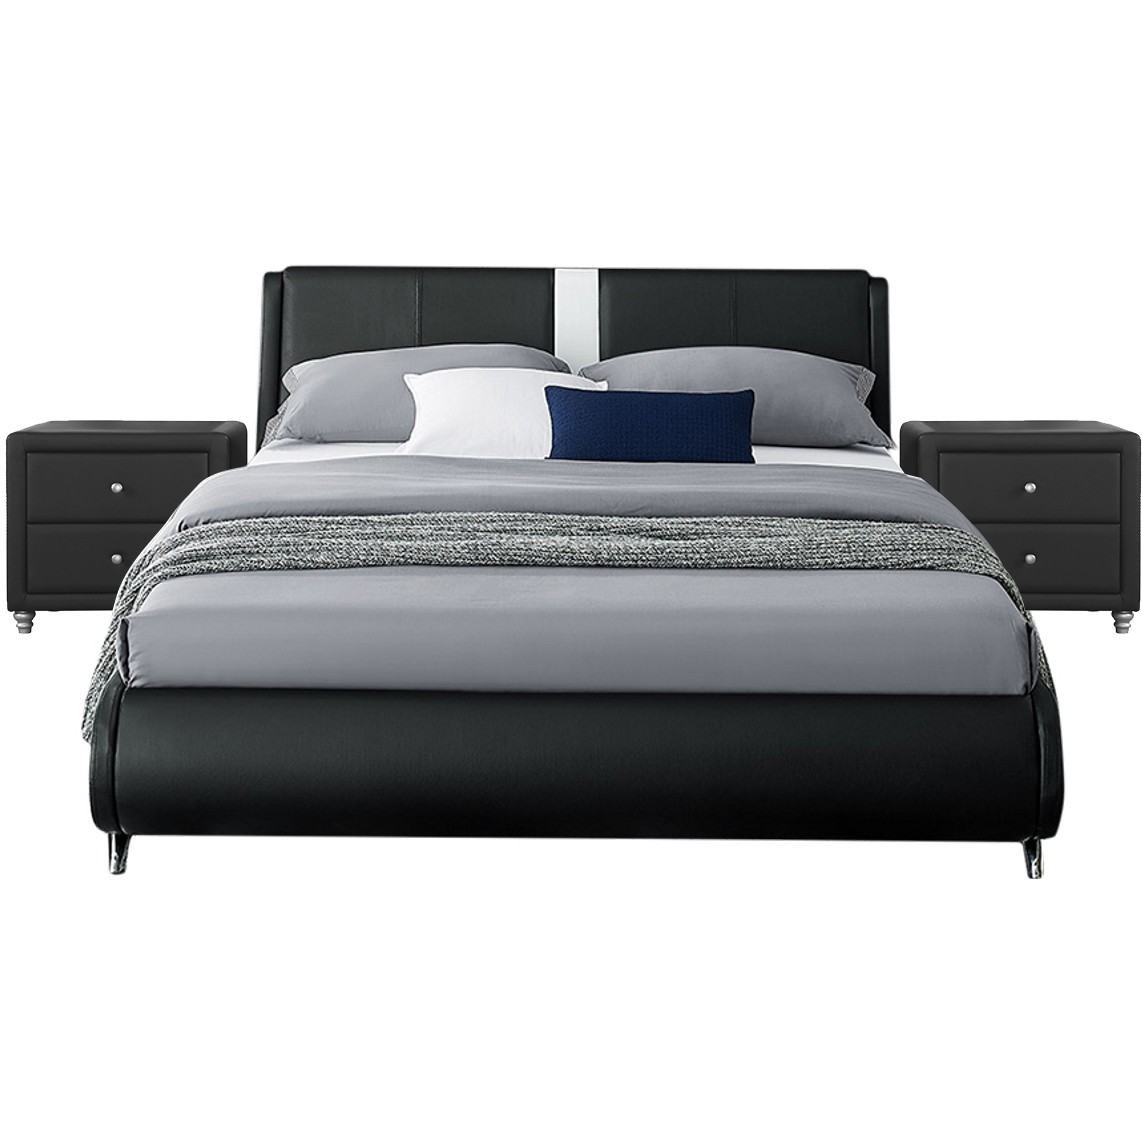 Black Platform King Bed with Two Nightstands-397020-1